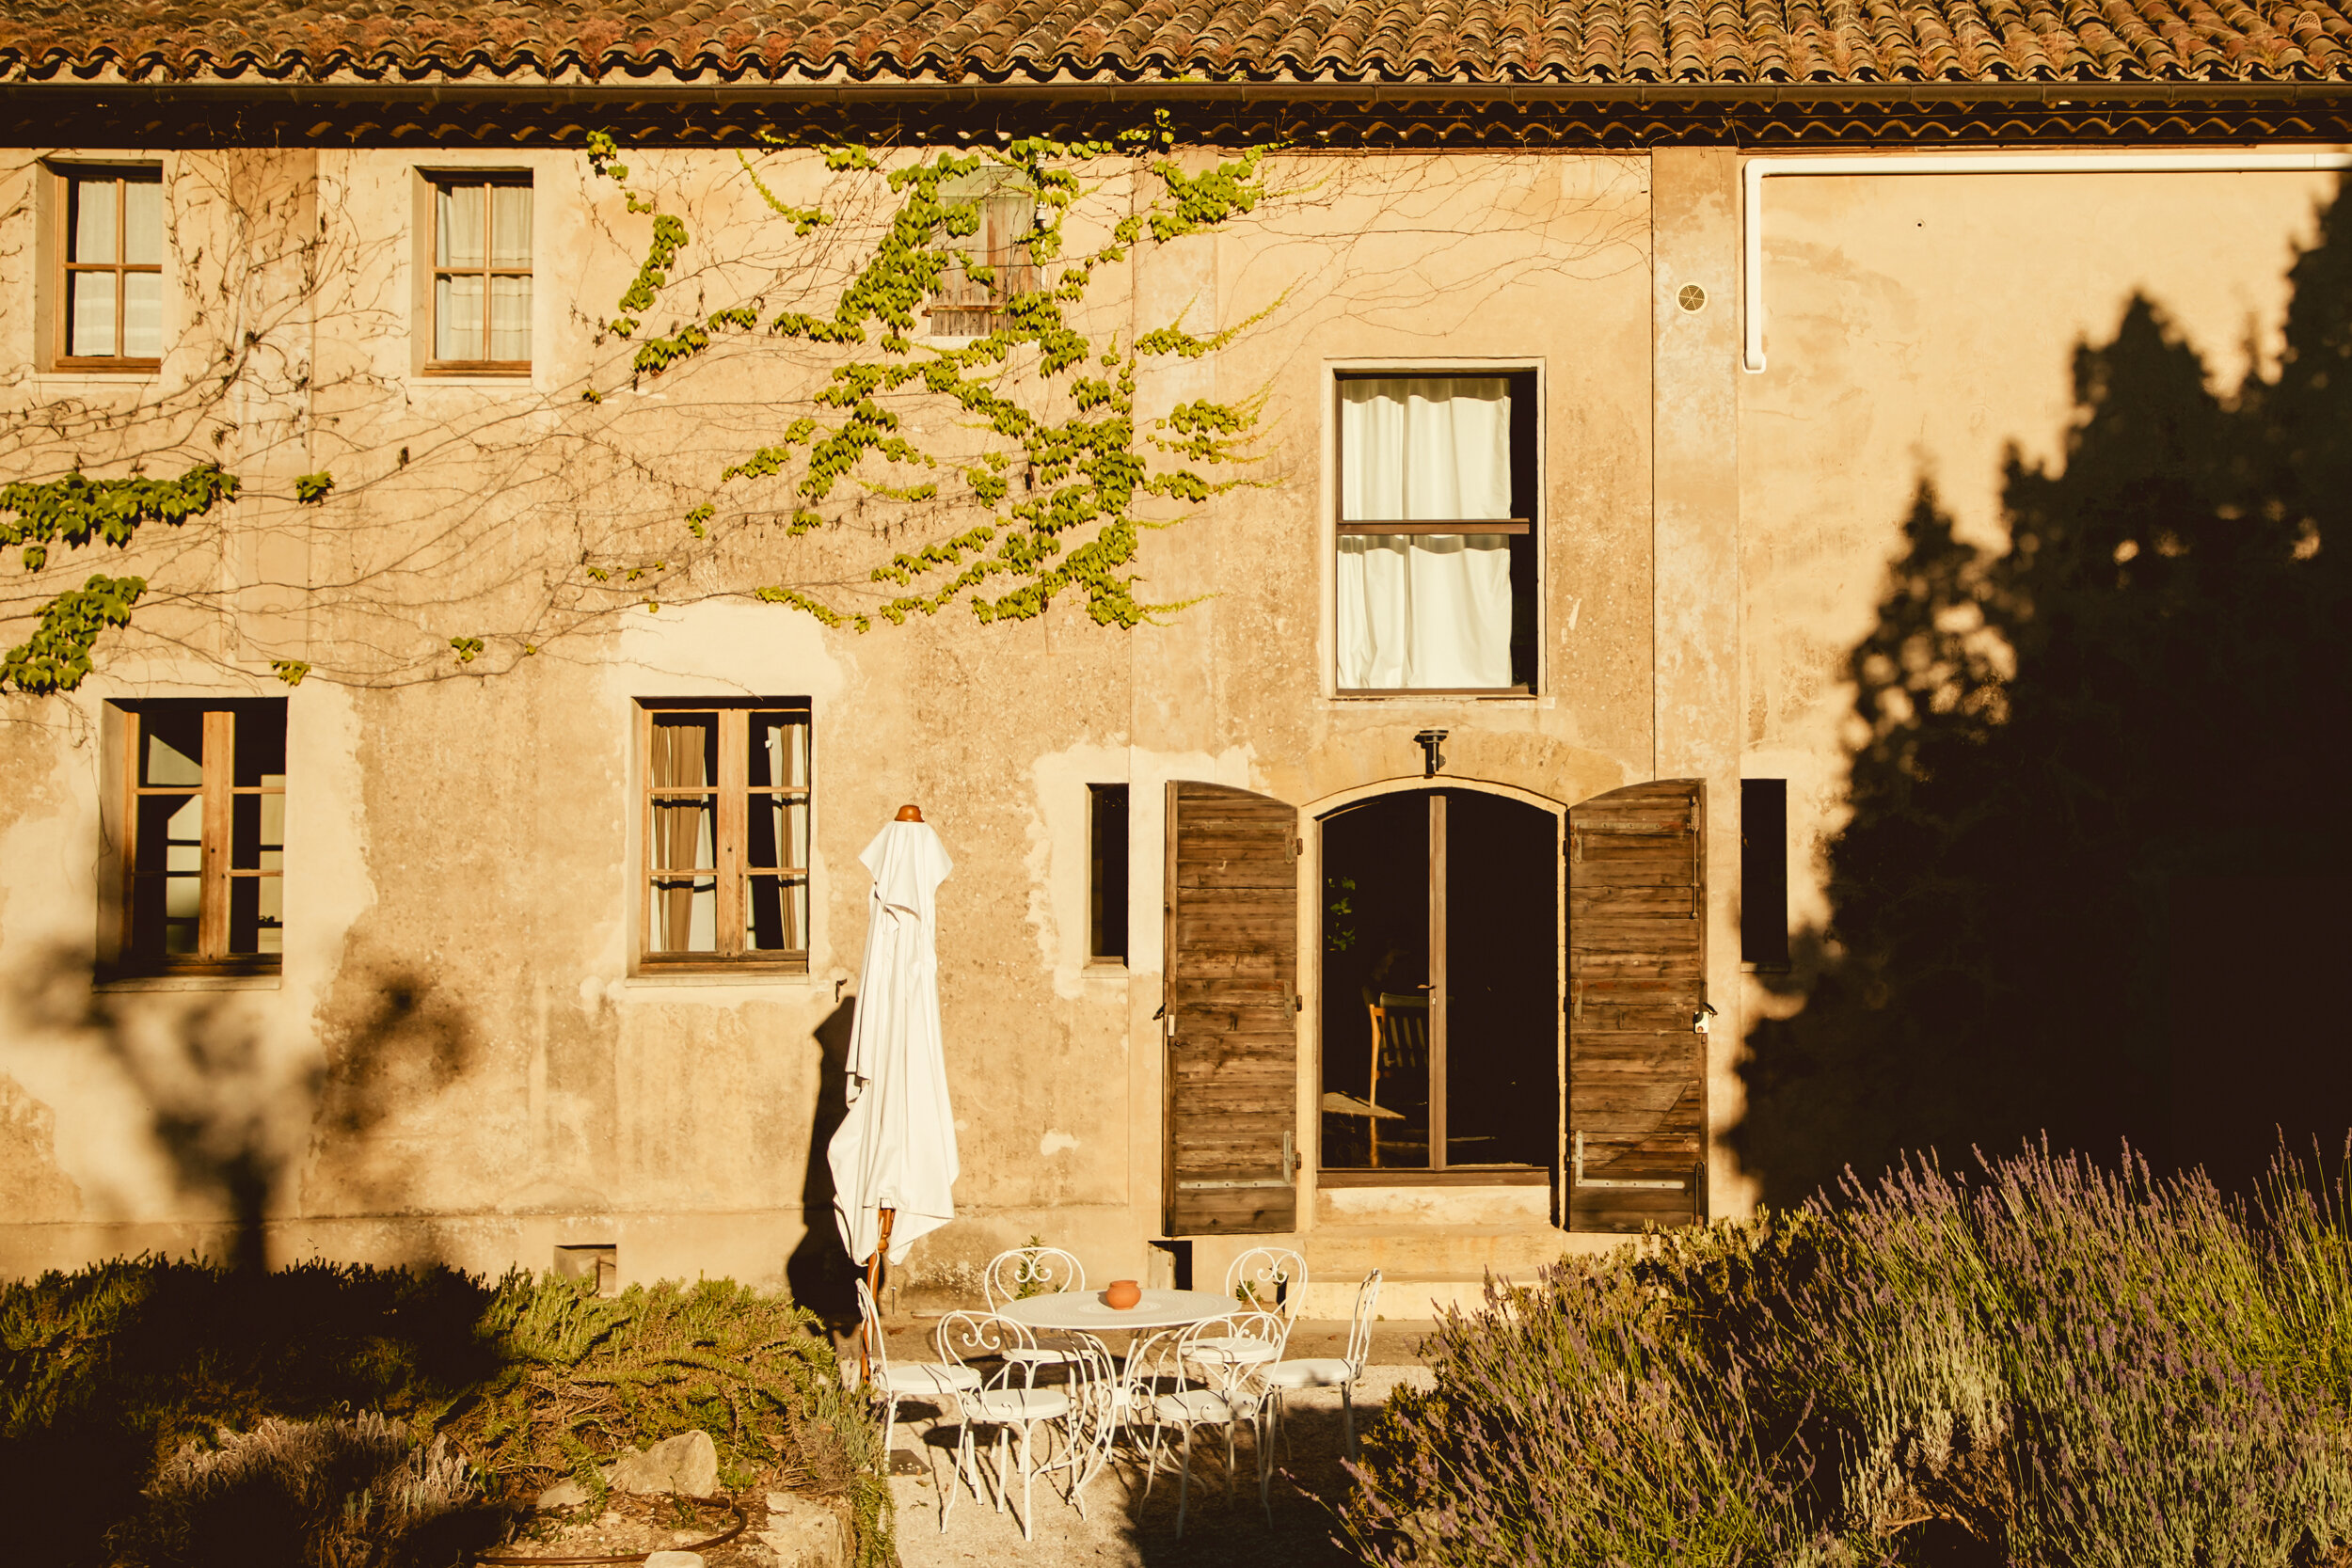 A Provencal Stay at Le Galinier Hotel in Lourmarin France